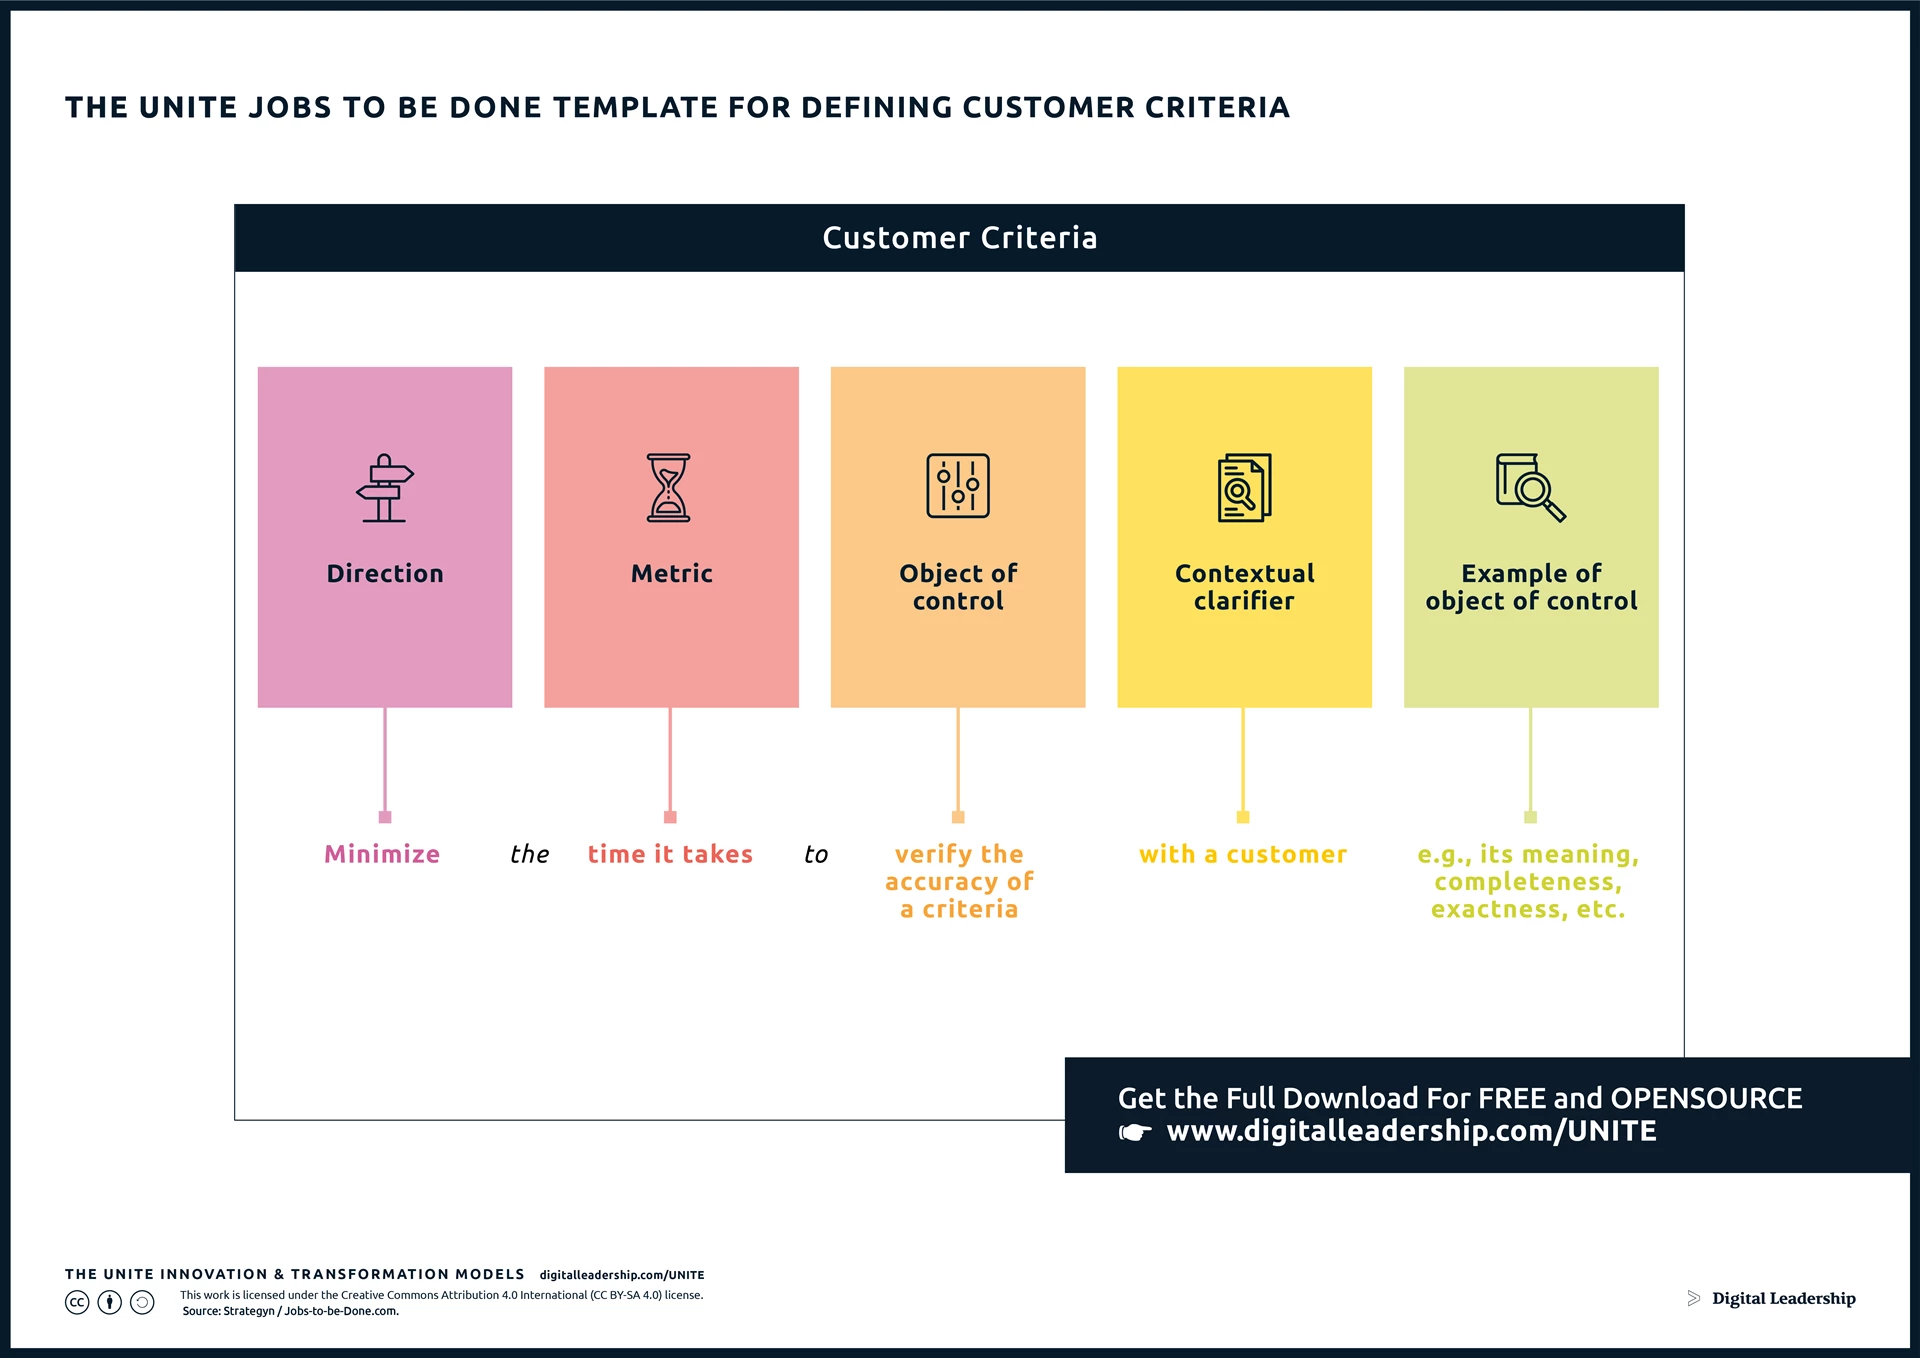 Jobs to be done Customer Criteria template